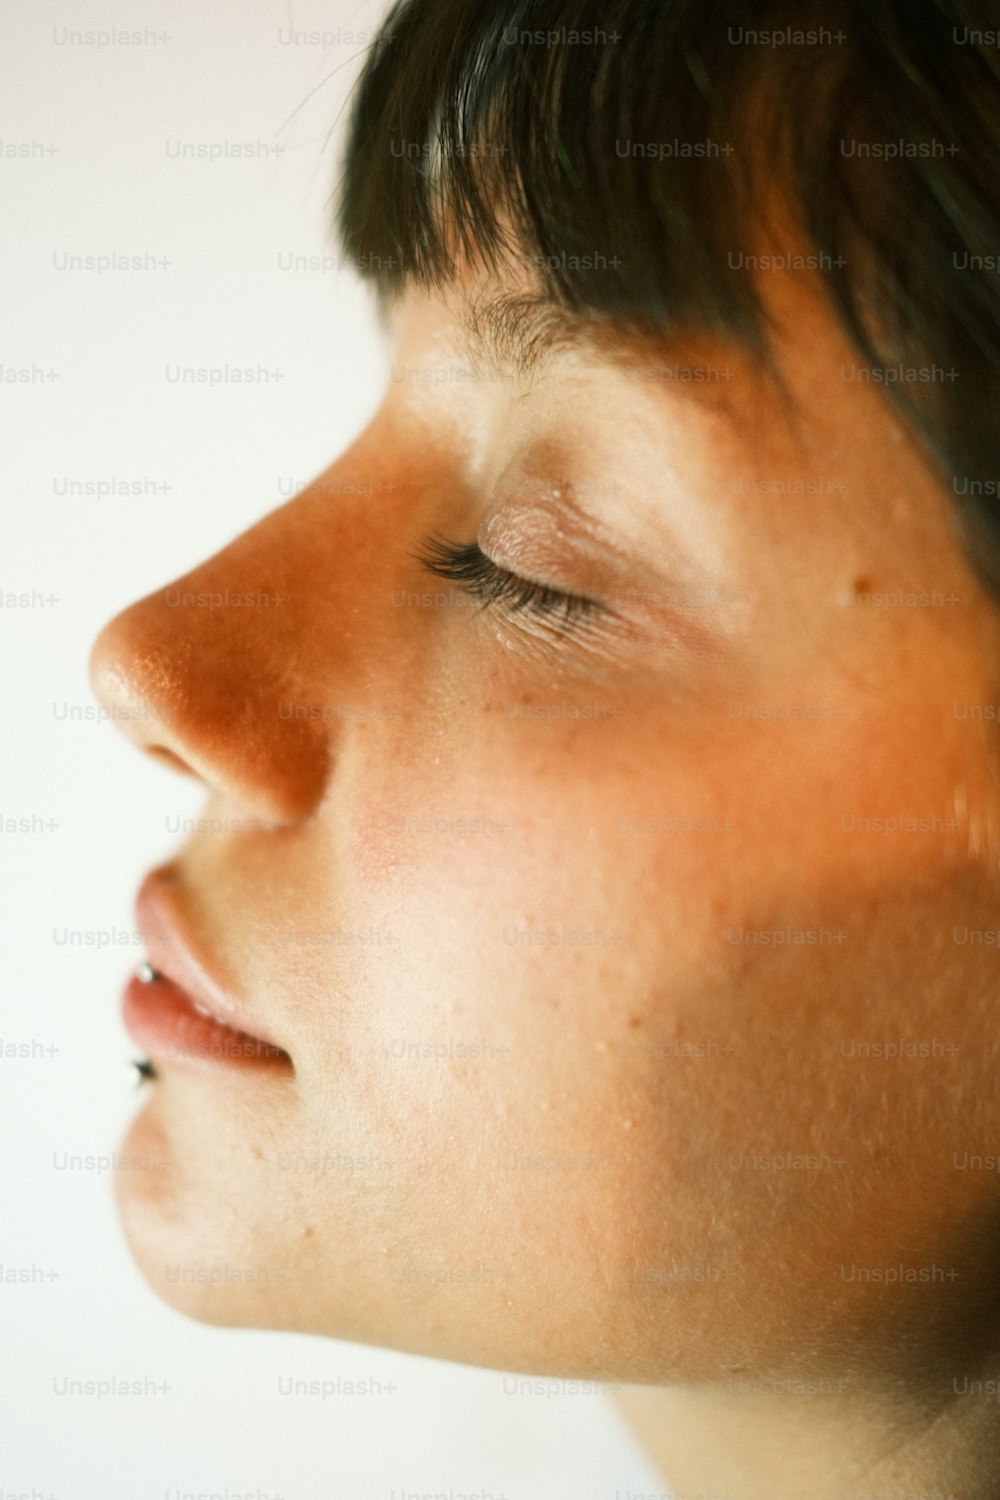 a close up of a person with their eyes closed